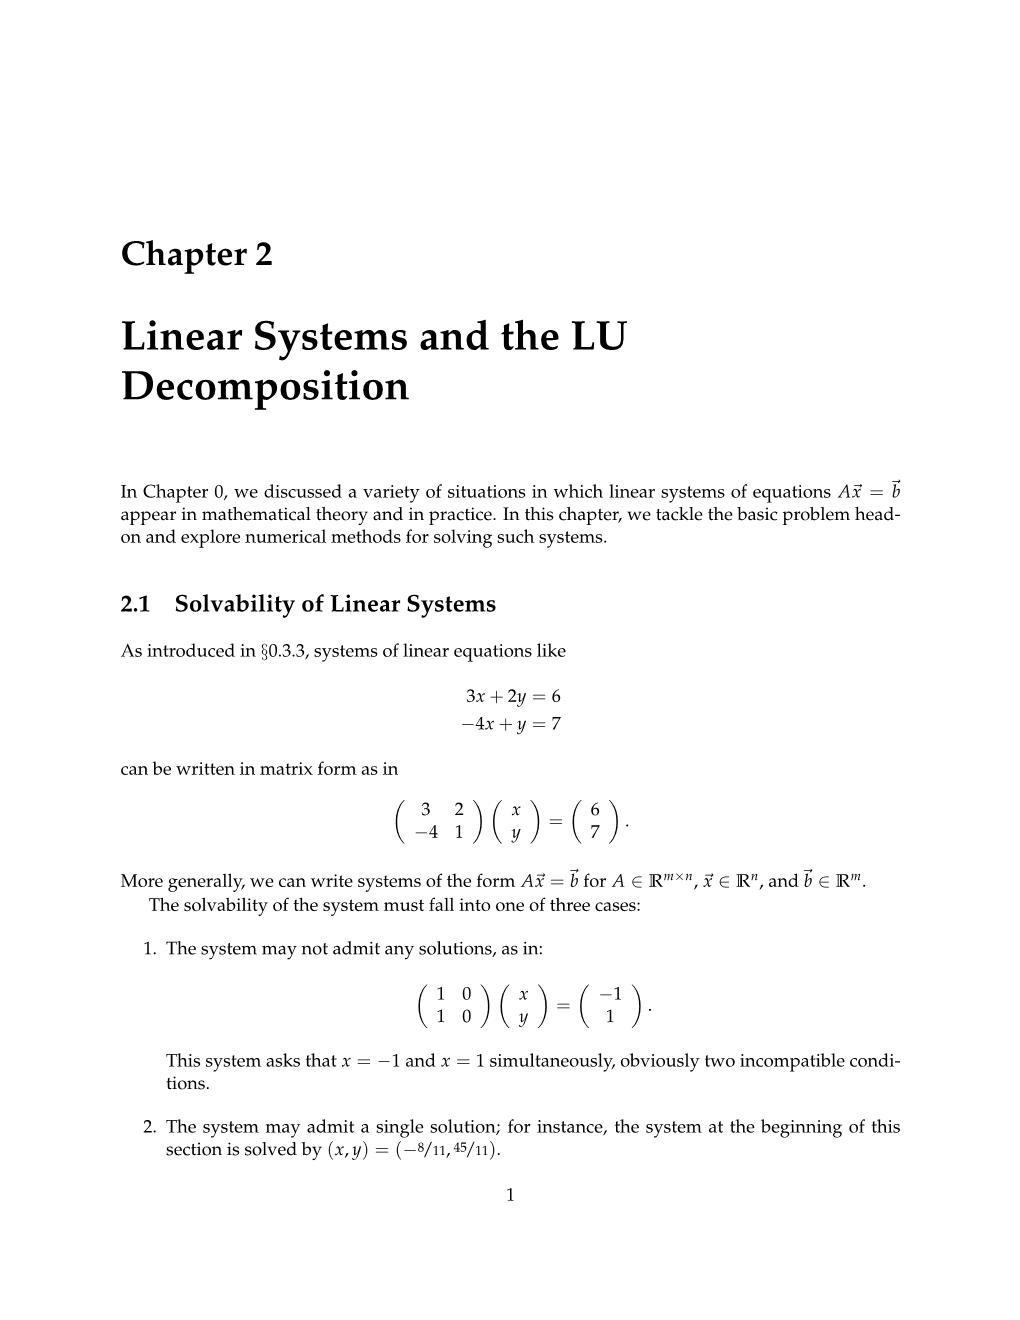 Linear Systems and the LU Decomposition